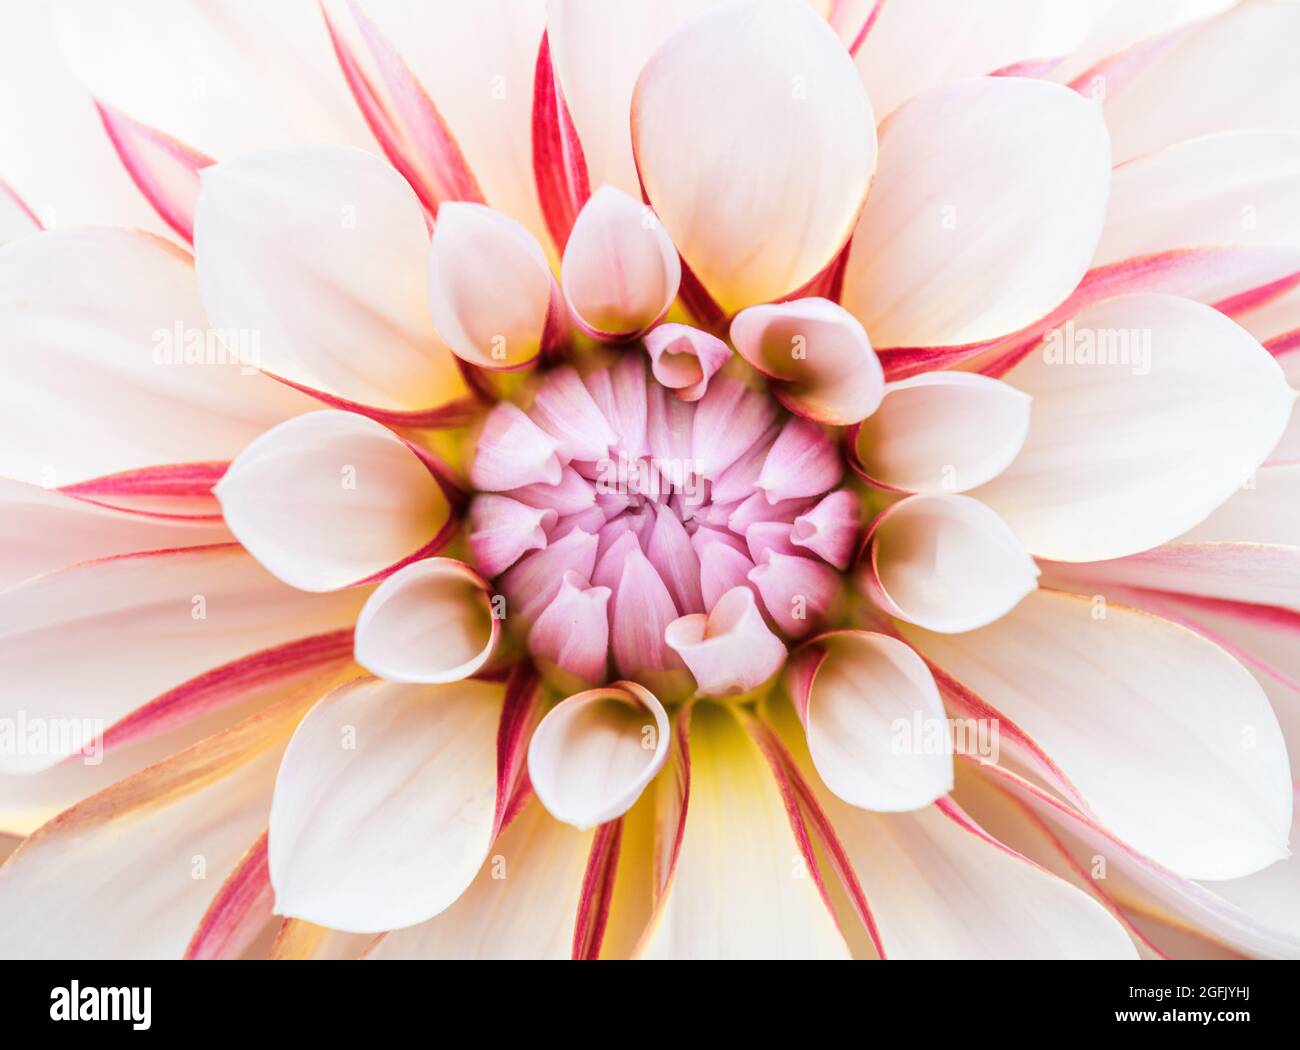 A close up of a single white dahlia flower with vibrant pink red stripes. Stock Photo